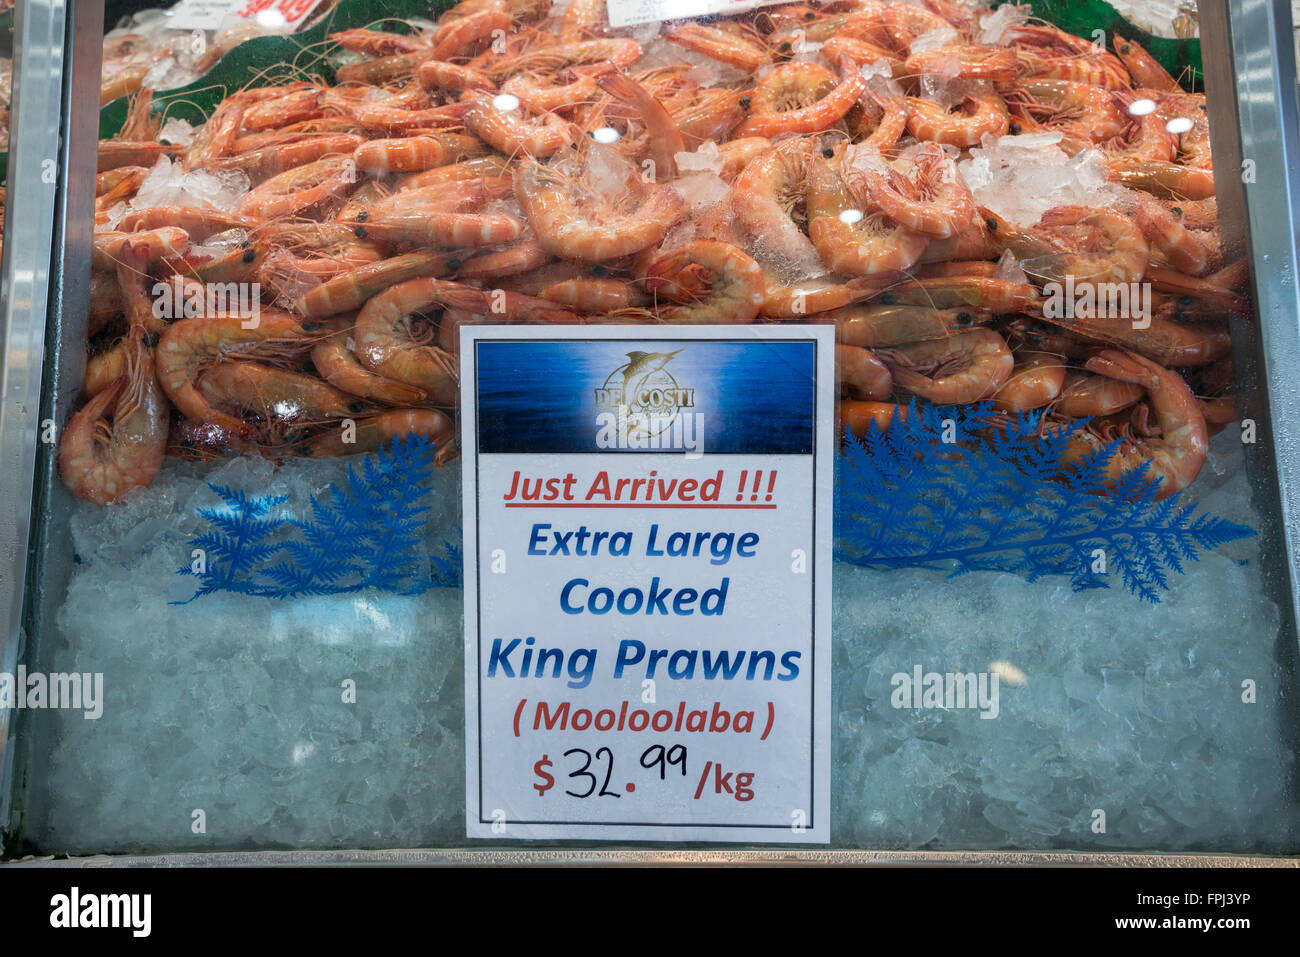 King Prawns on sale at the Sydney Fish Market on Blackwattle Bay in Sydney, New South Wales, Australia. The fish market is the t Stock Photo